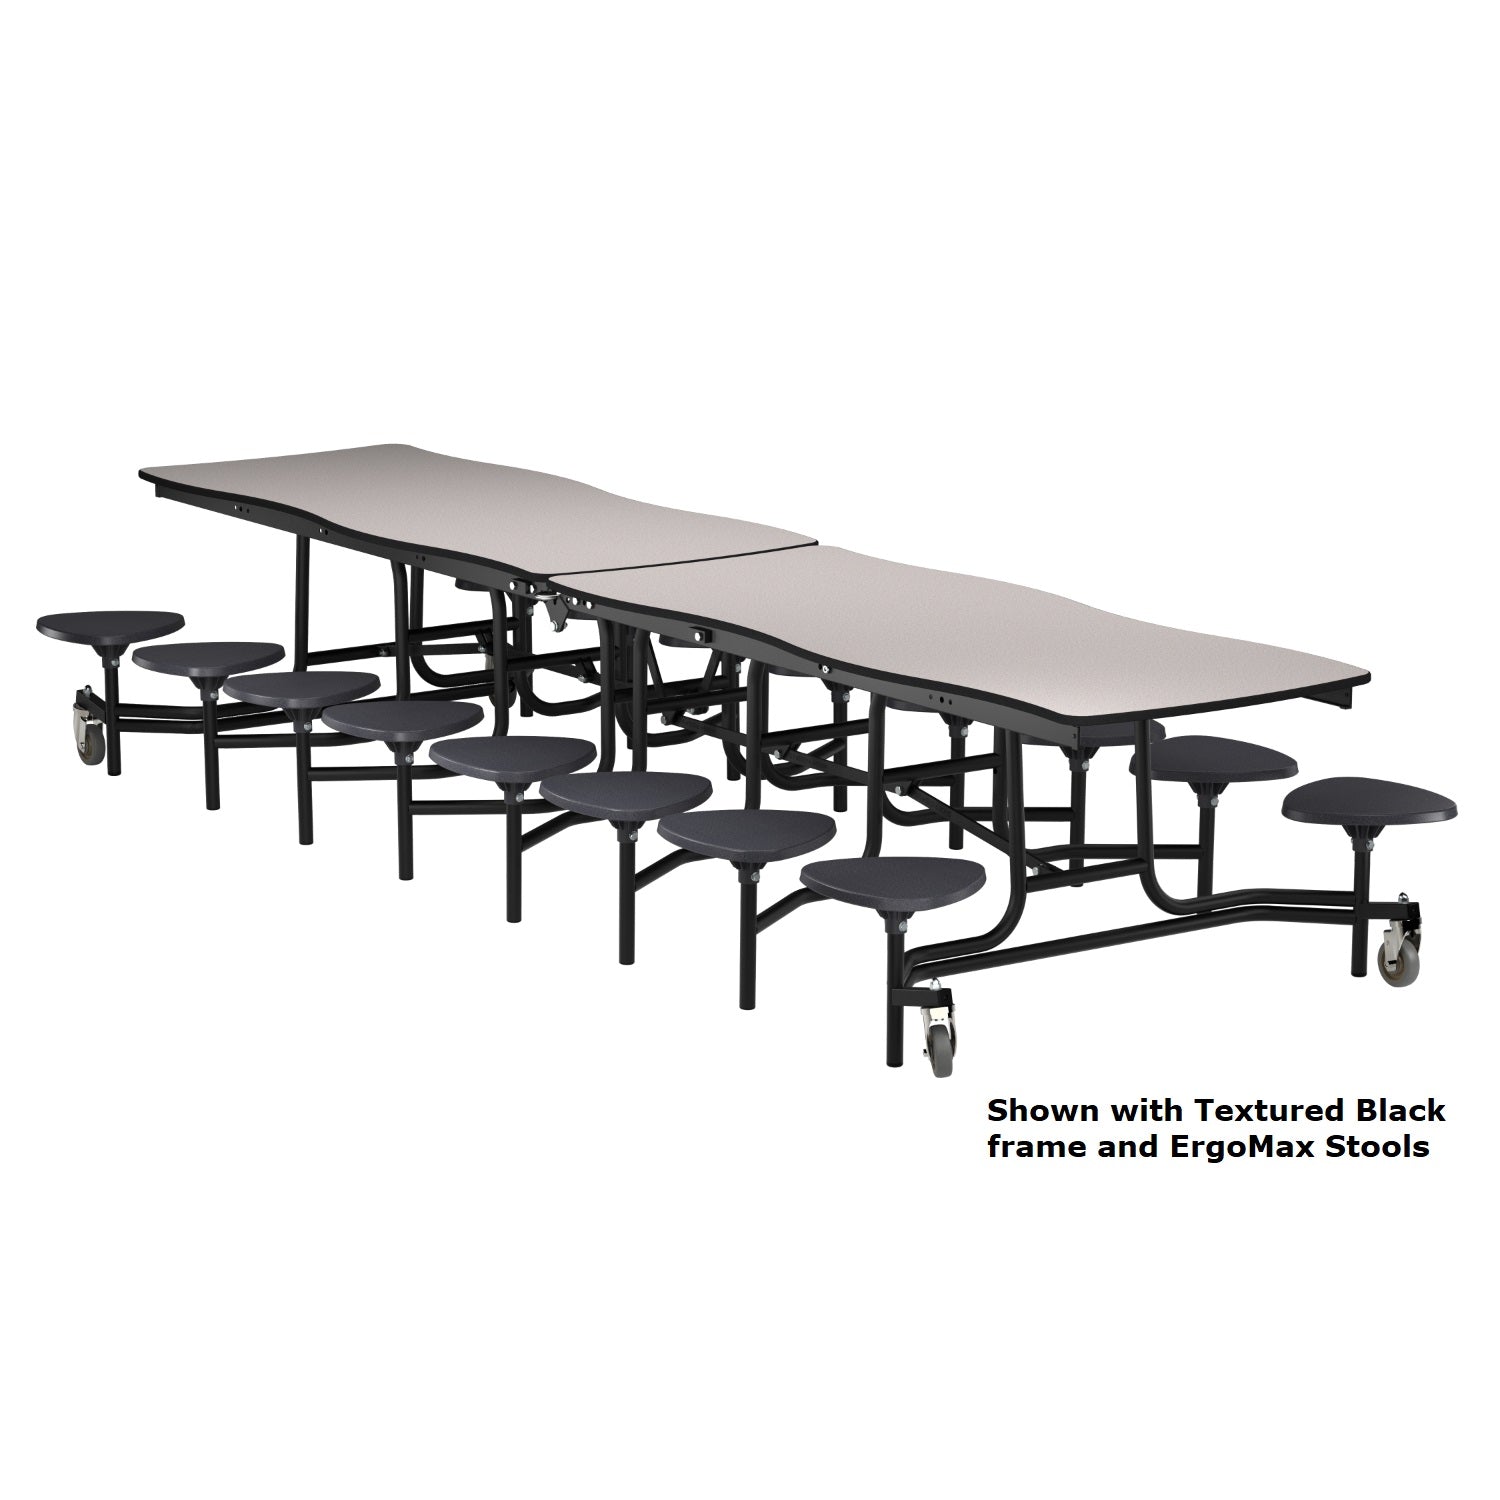 Mobile Cafeteria Table with 16 Stools, 12' Swerve, MDF Core, Black ProtectEdge, Textured Black Frame